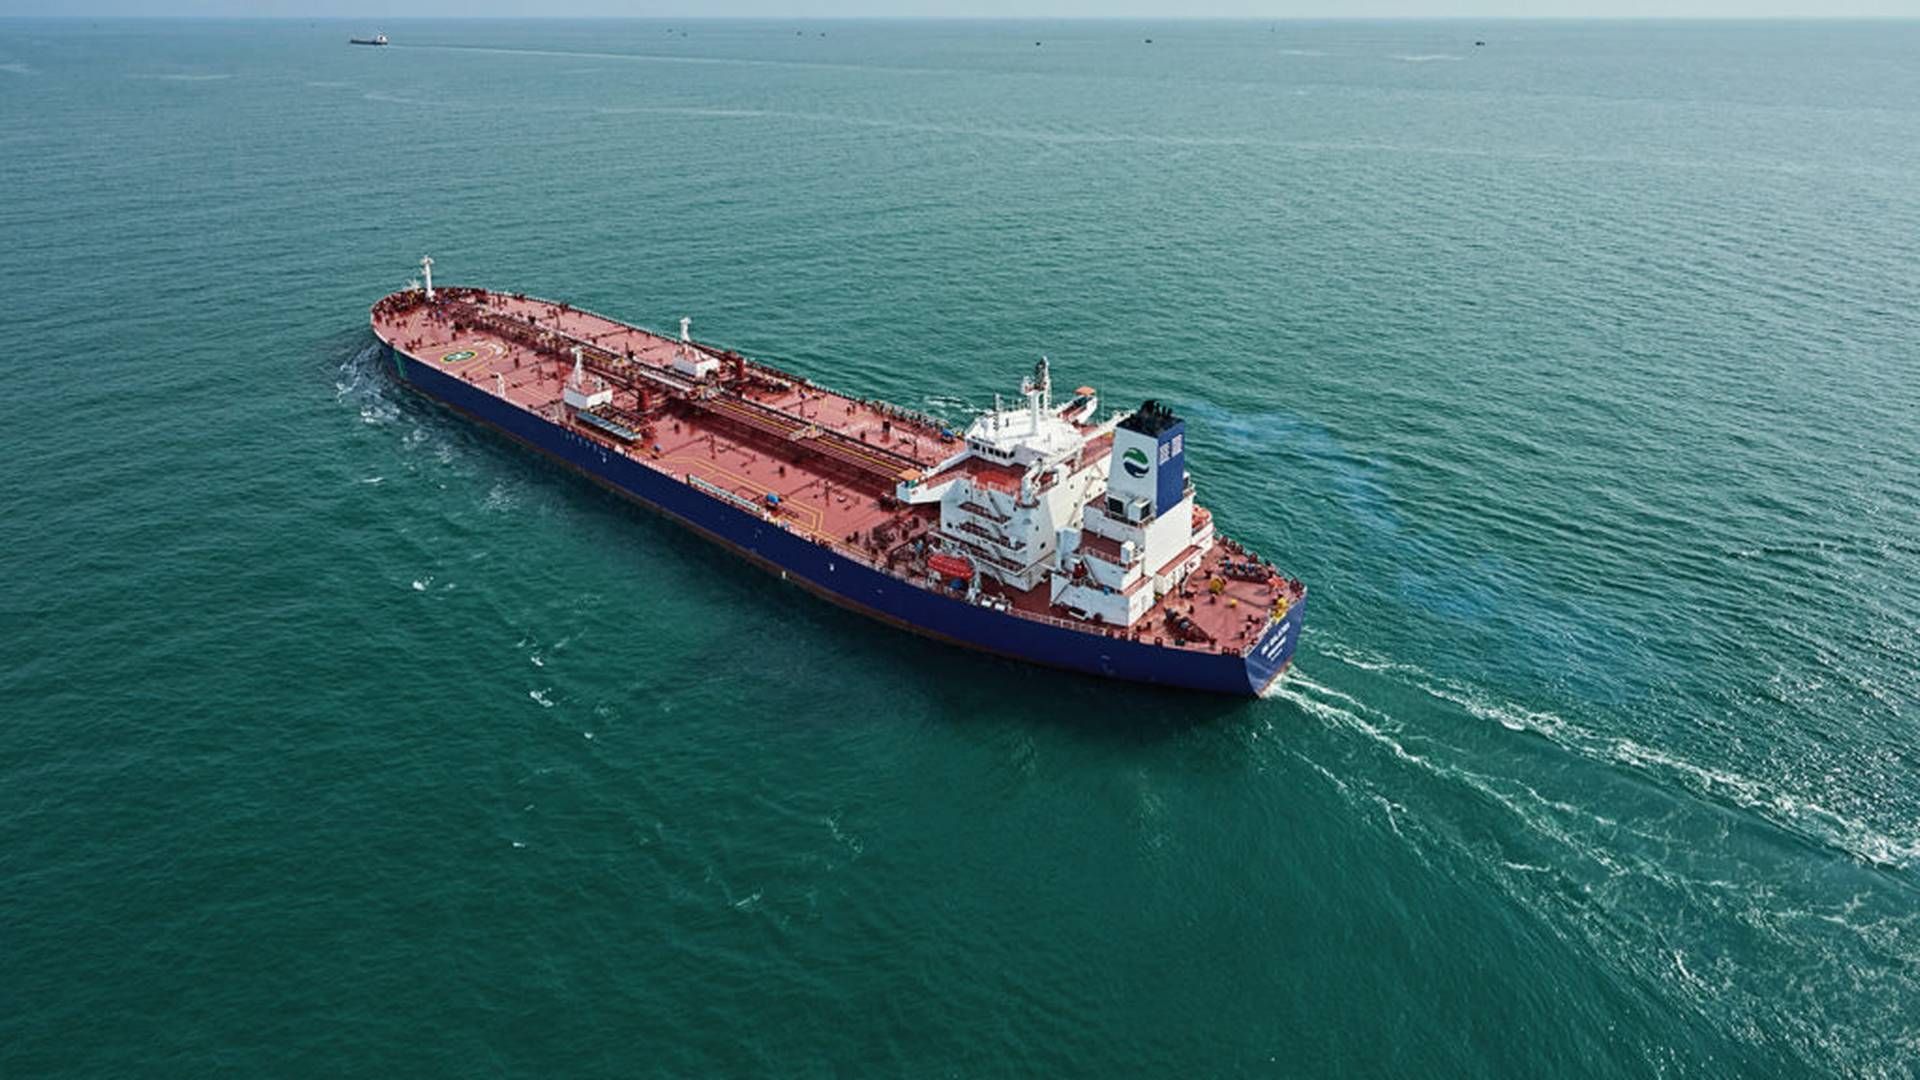 The tanker shipping company Hafnia is welcoming a new member to its board in the form of Su Yin Anand, who, among other roles, has served as head of shipping at the large mining company, South32. | Photo: Pr / Hafnia